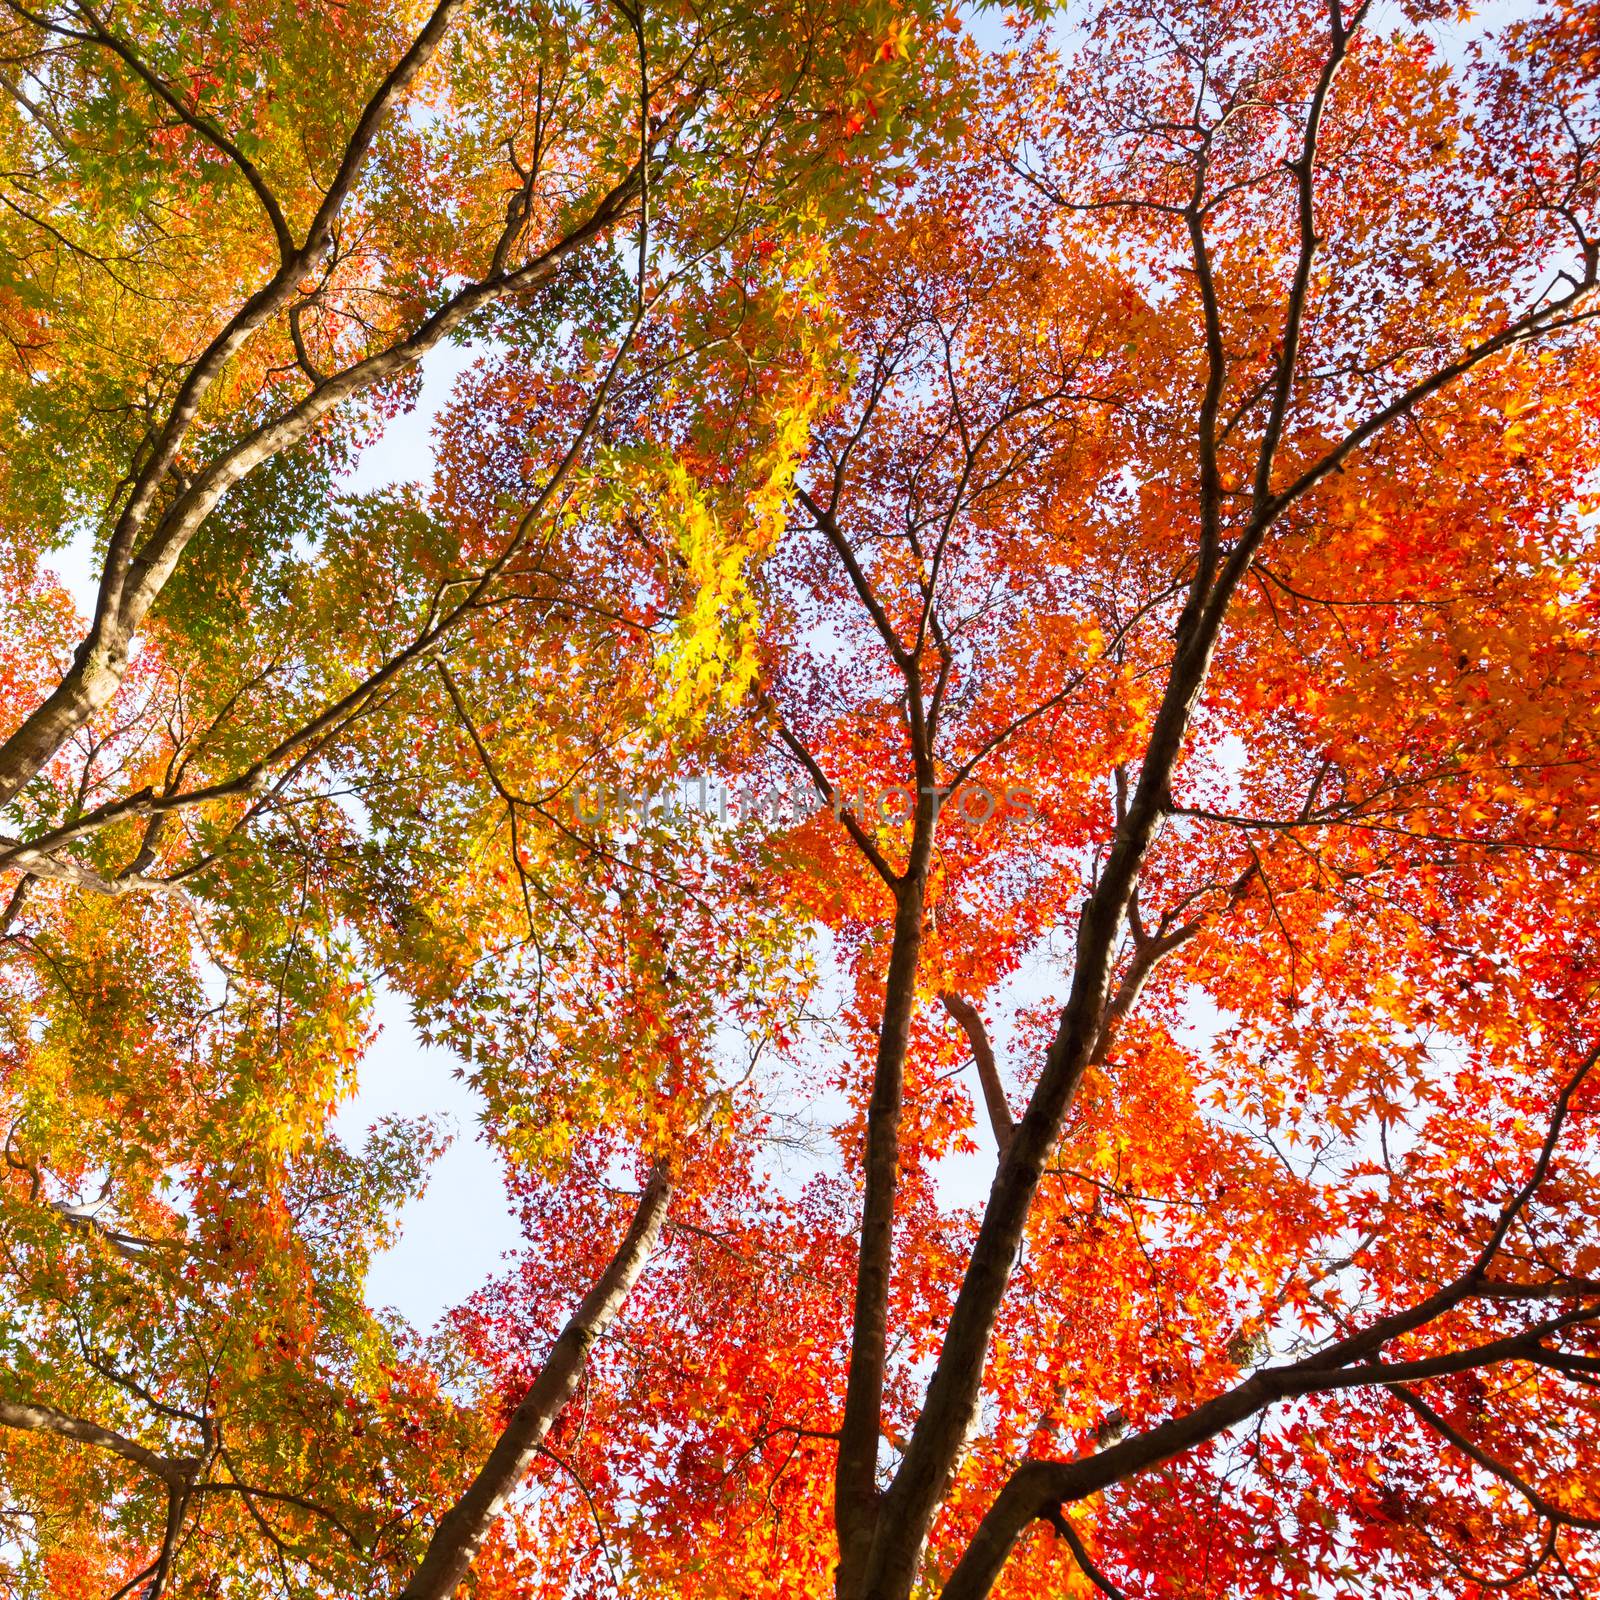 The warm autumn sun shining through colorful treetops, with beautiful bright blue sky. Square composition.